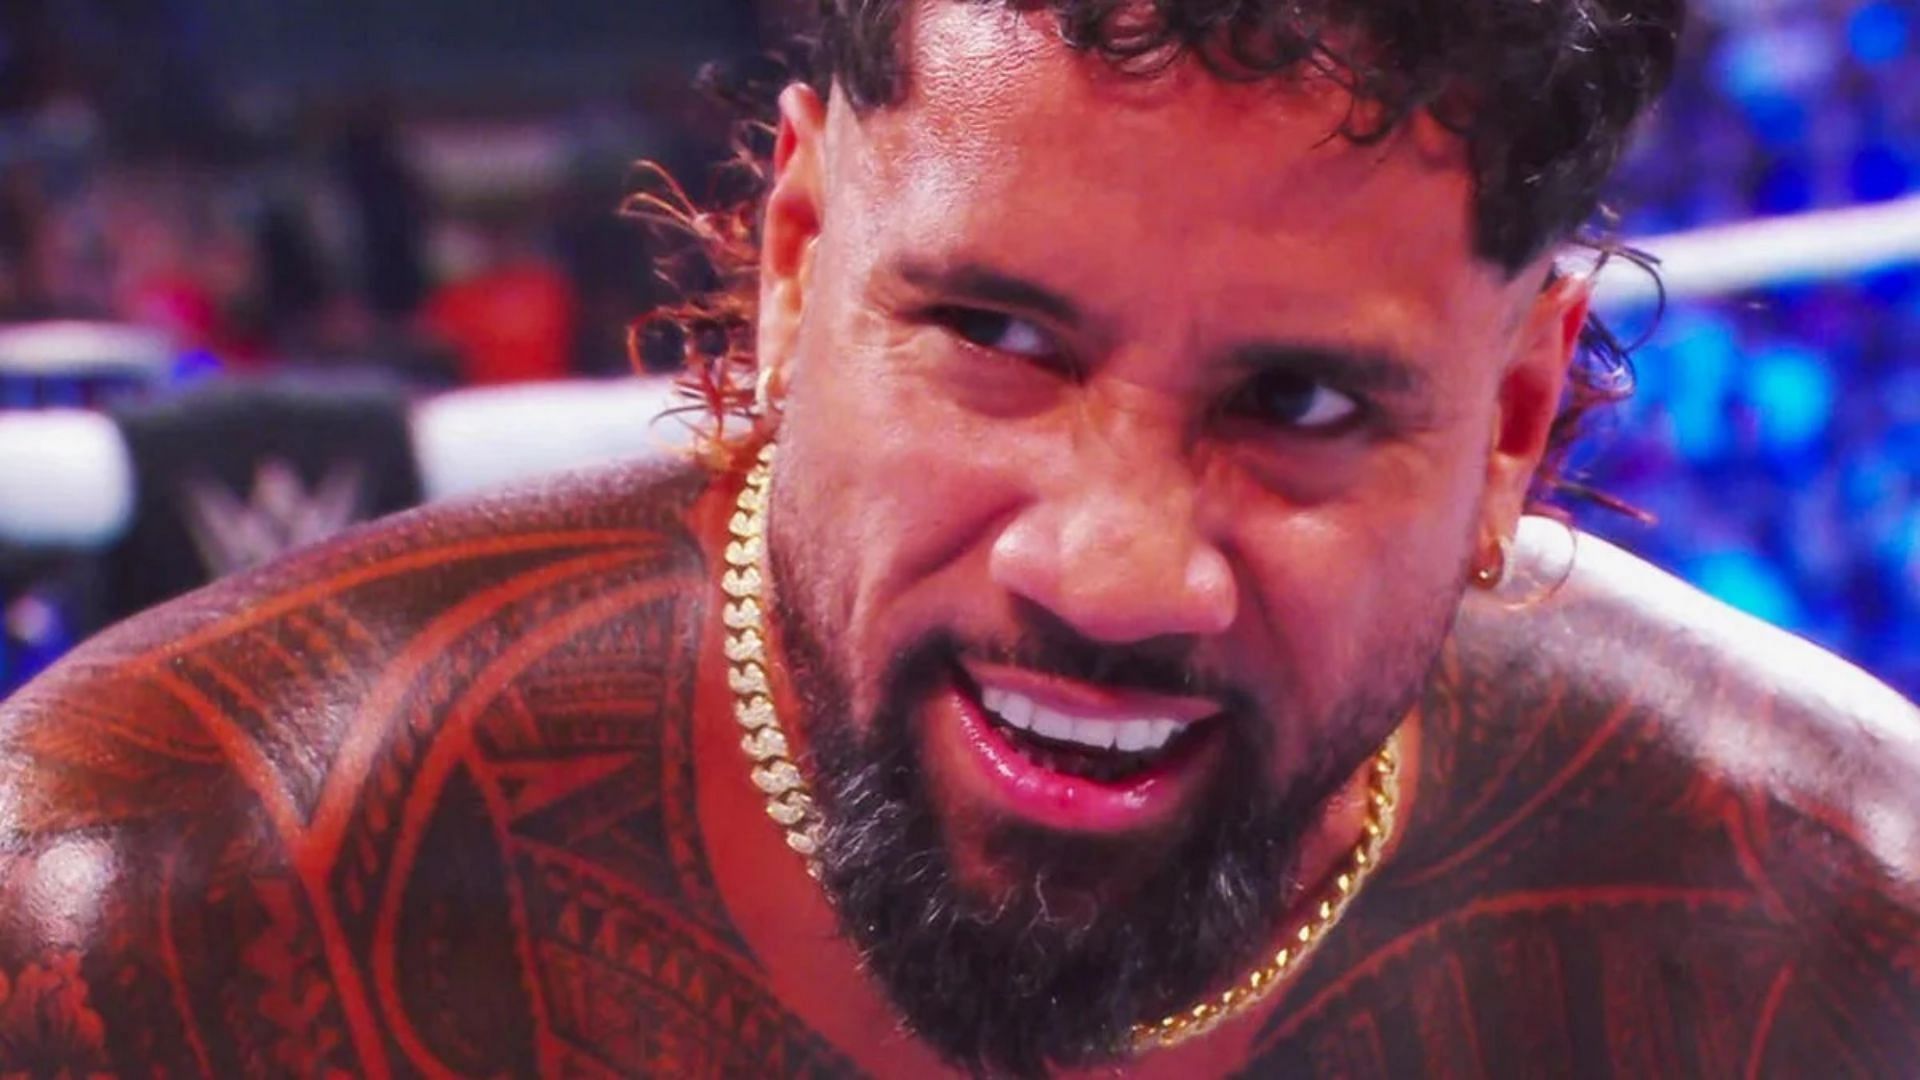 Jey Uso is a member of the RAW roster